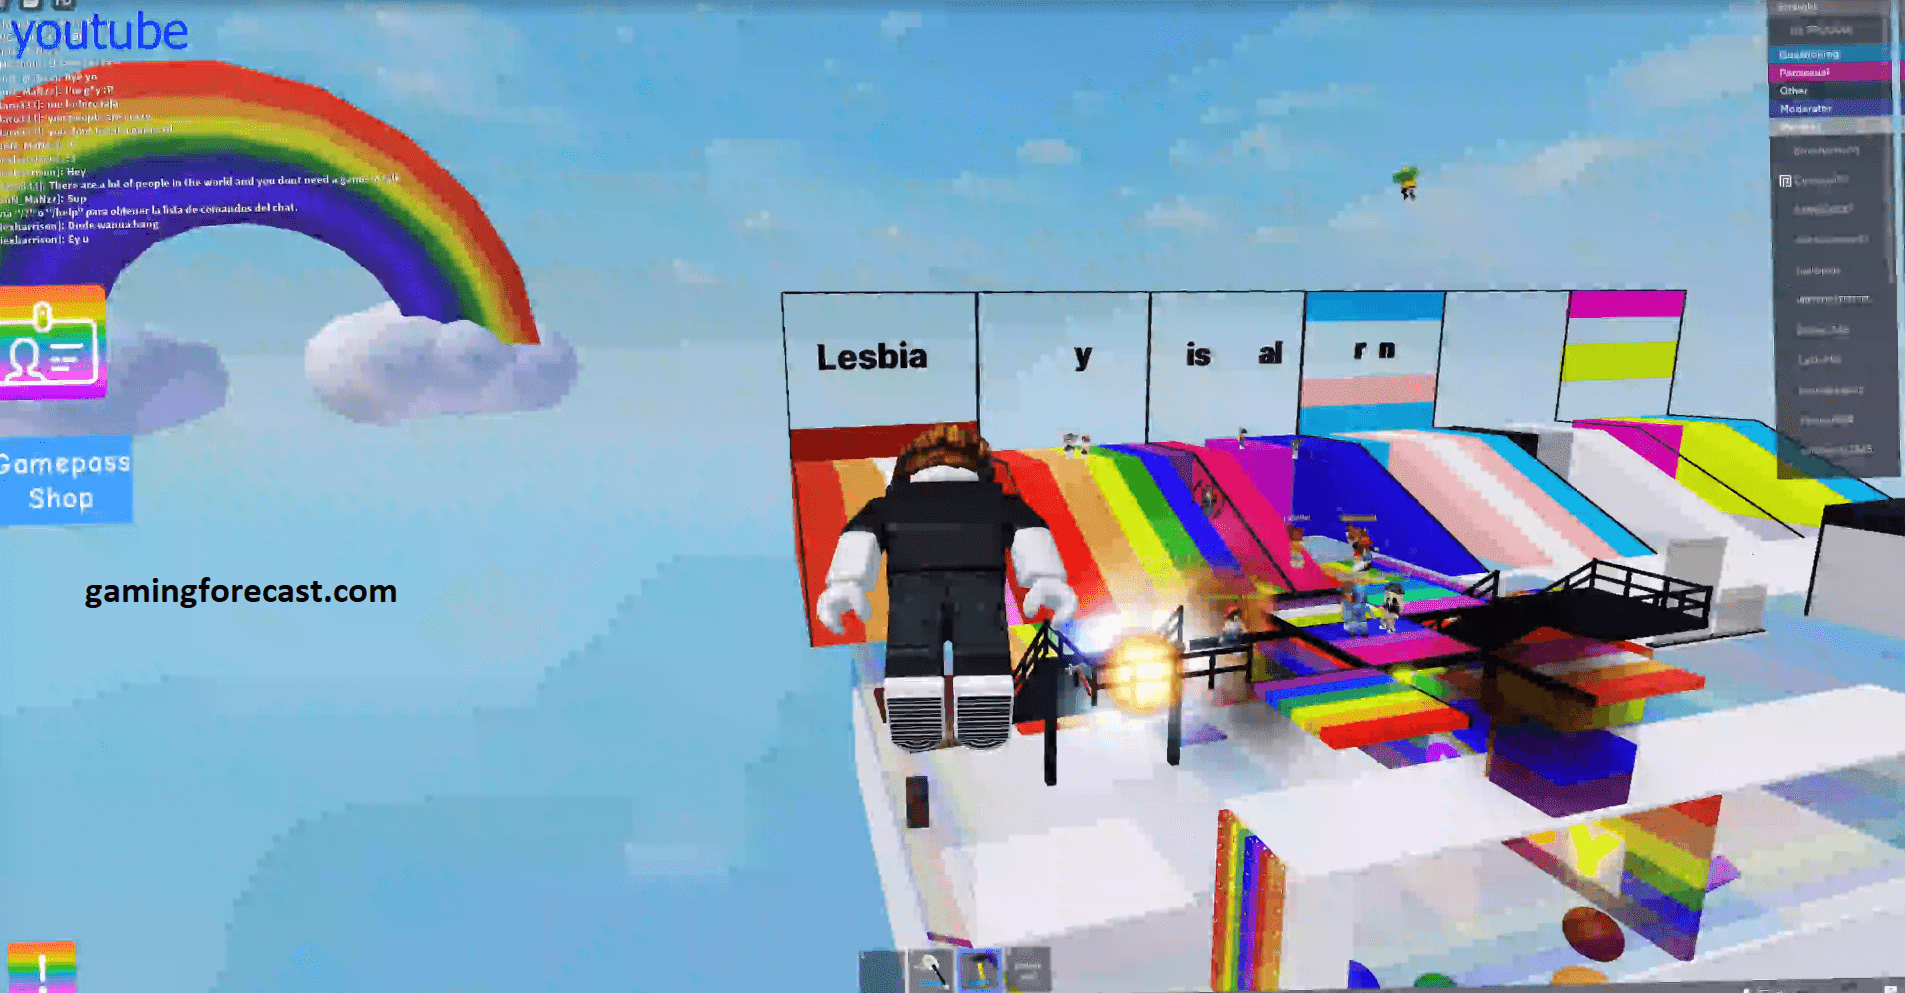 Roblox Hack Download Pc Destroy Lobby Fly Aimbot Scripts 2021 Gaming Forecast Download Free Online Game Hacks - roblox hacks 2021 android